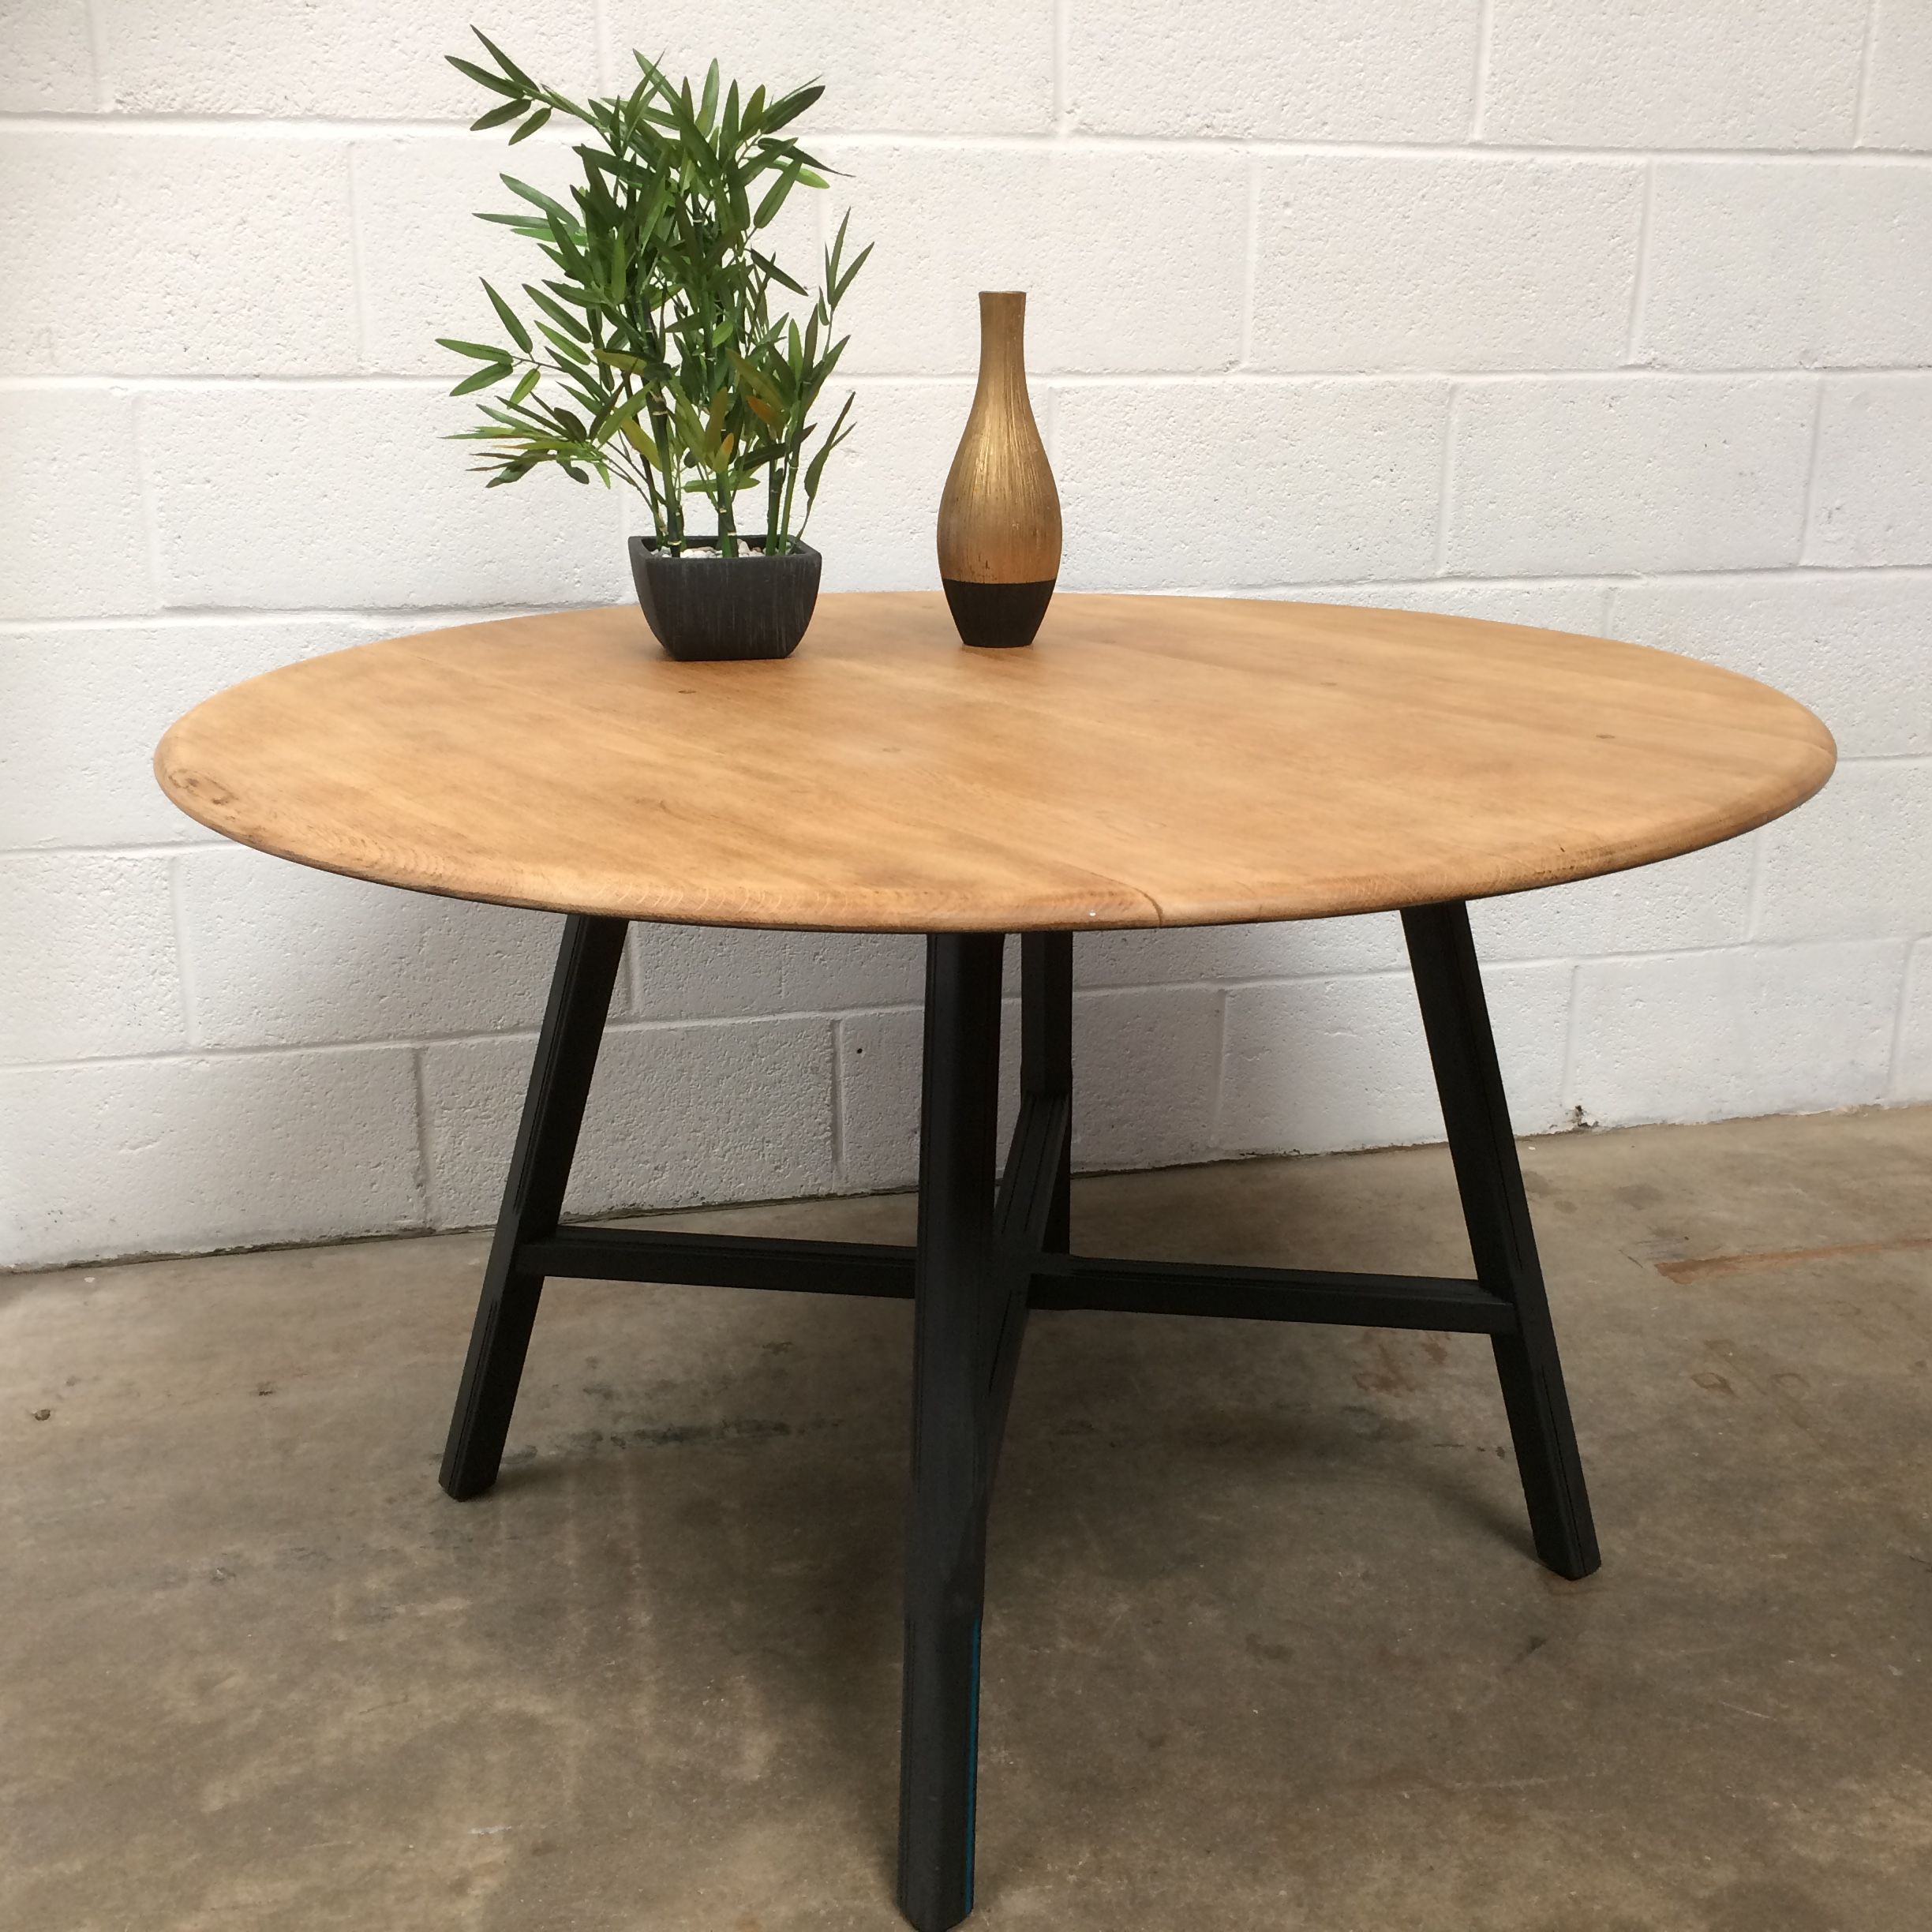 Upcycled Ercol Drop Leaf Table | Drop Leaf Table, Table Pertaining To Most Up To Date Drop Leaf Tables With Hairpin Legs (View 7 of 15)